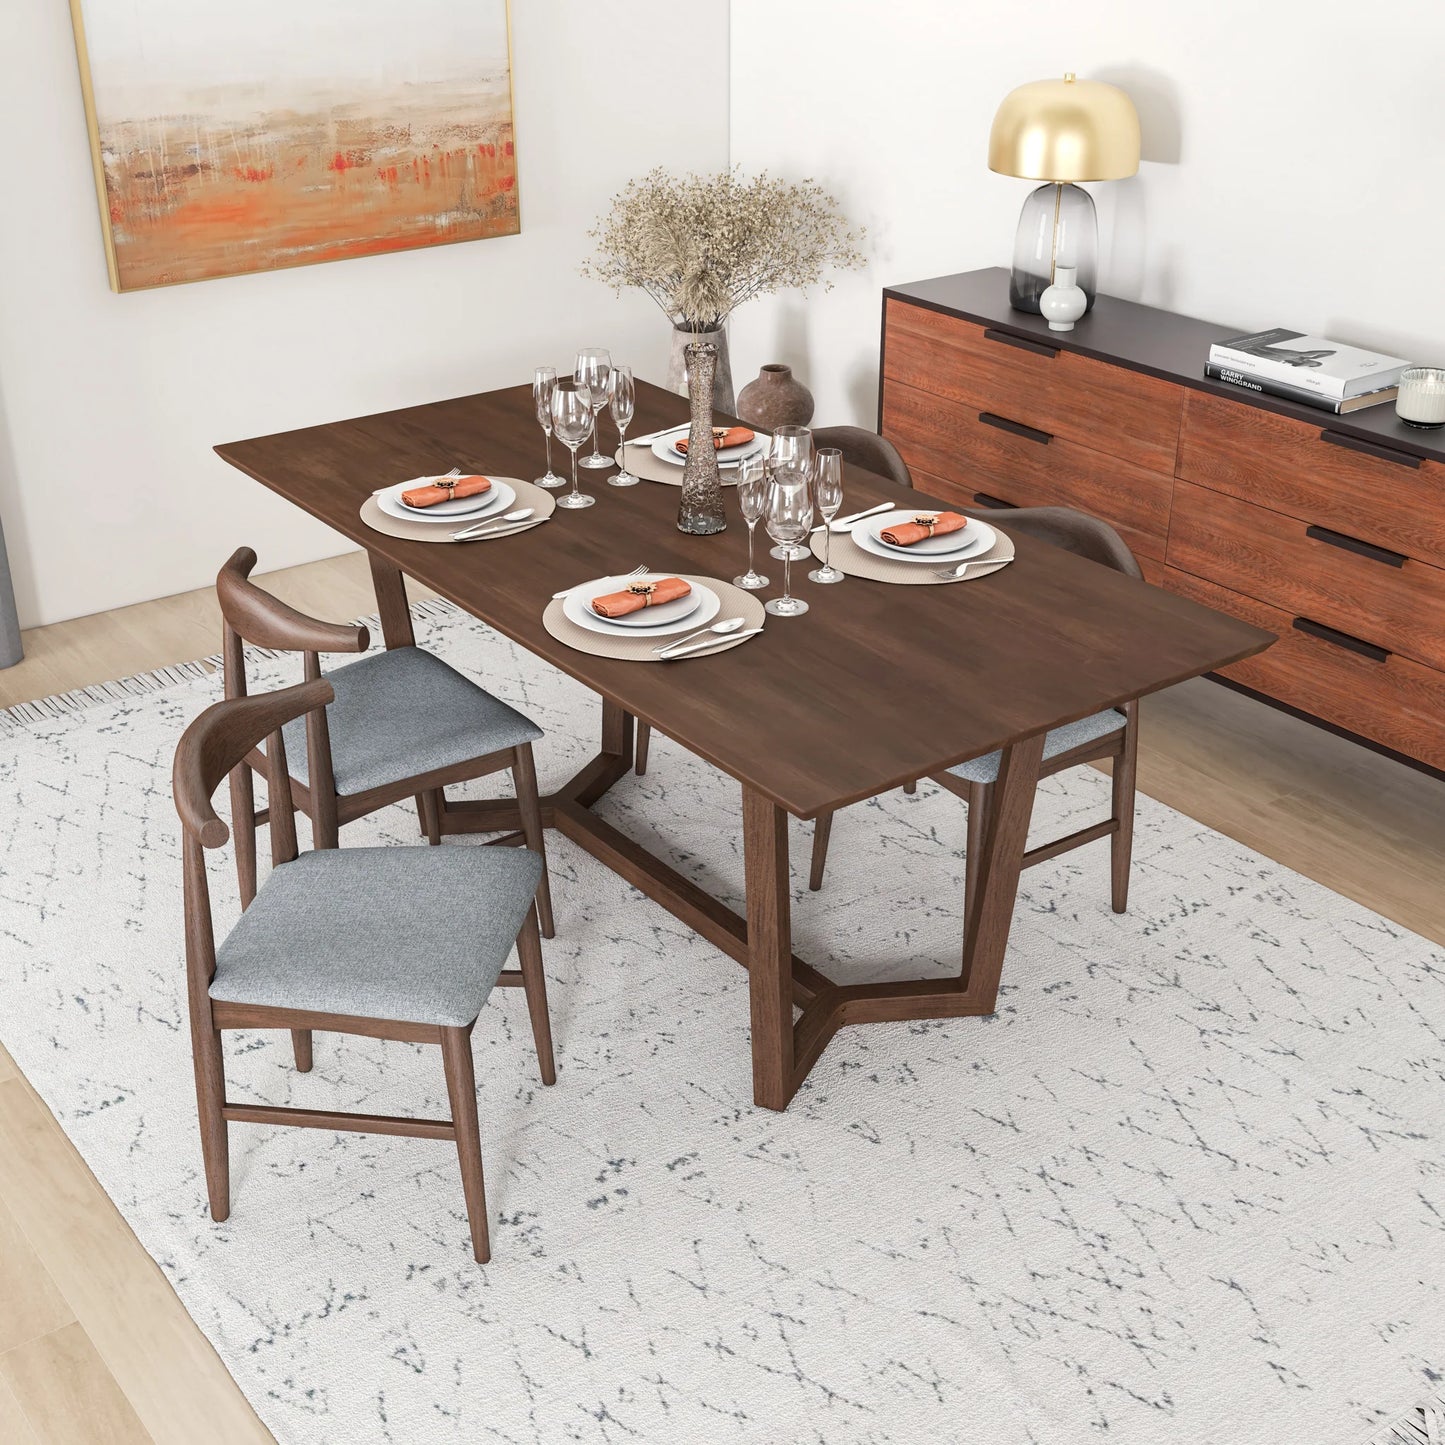 Rolda Dining set with 4 Winston Dining Chairs (Gray Fabric)